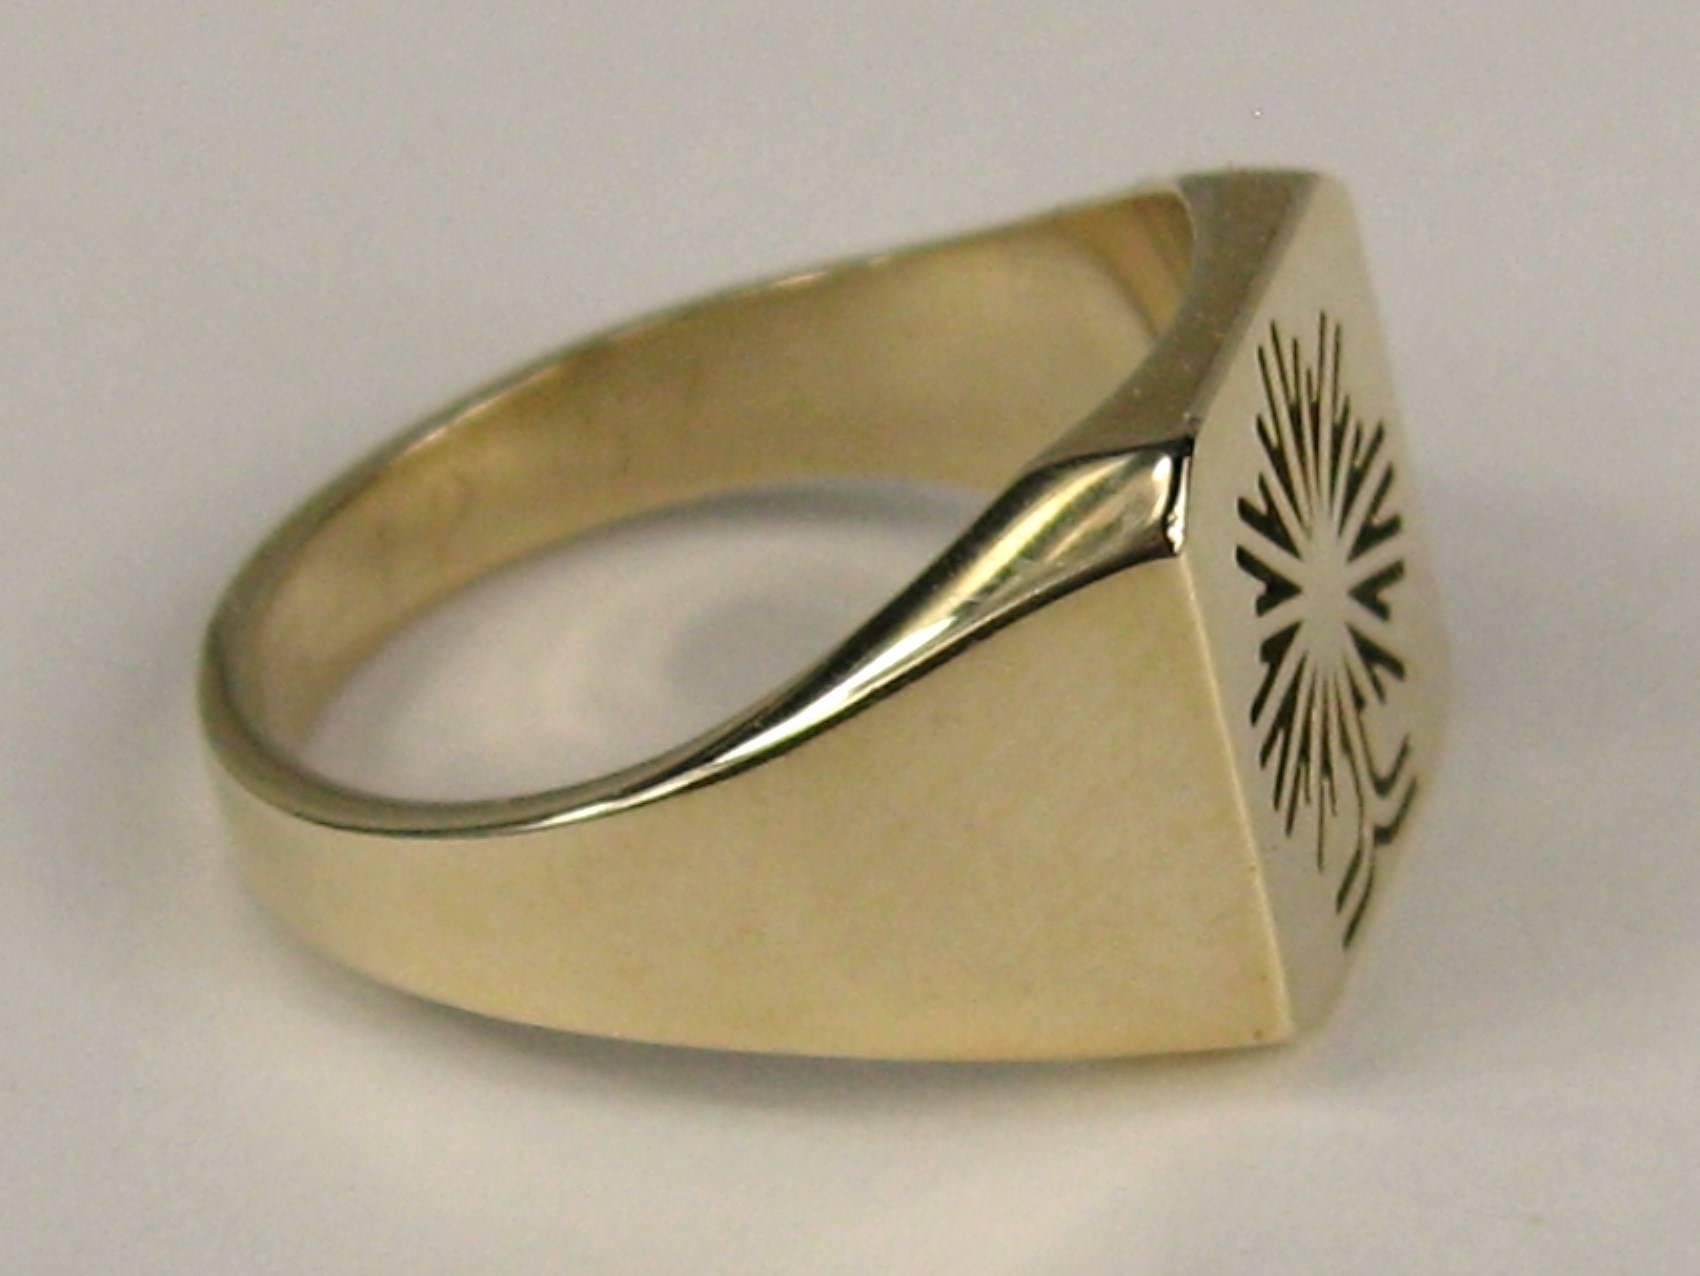 Modern in its design, a clean sleek gold ring with a tree motif. Inside its monogrammed 8/12/1957 WFJ.  10K Gold. This can easily be worn by a man or woman. Ring measures a 10 and can be sized by us or your jeweler.  Top of ring measures .53 in x